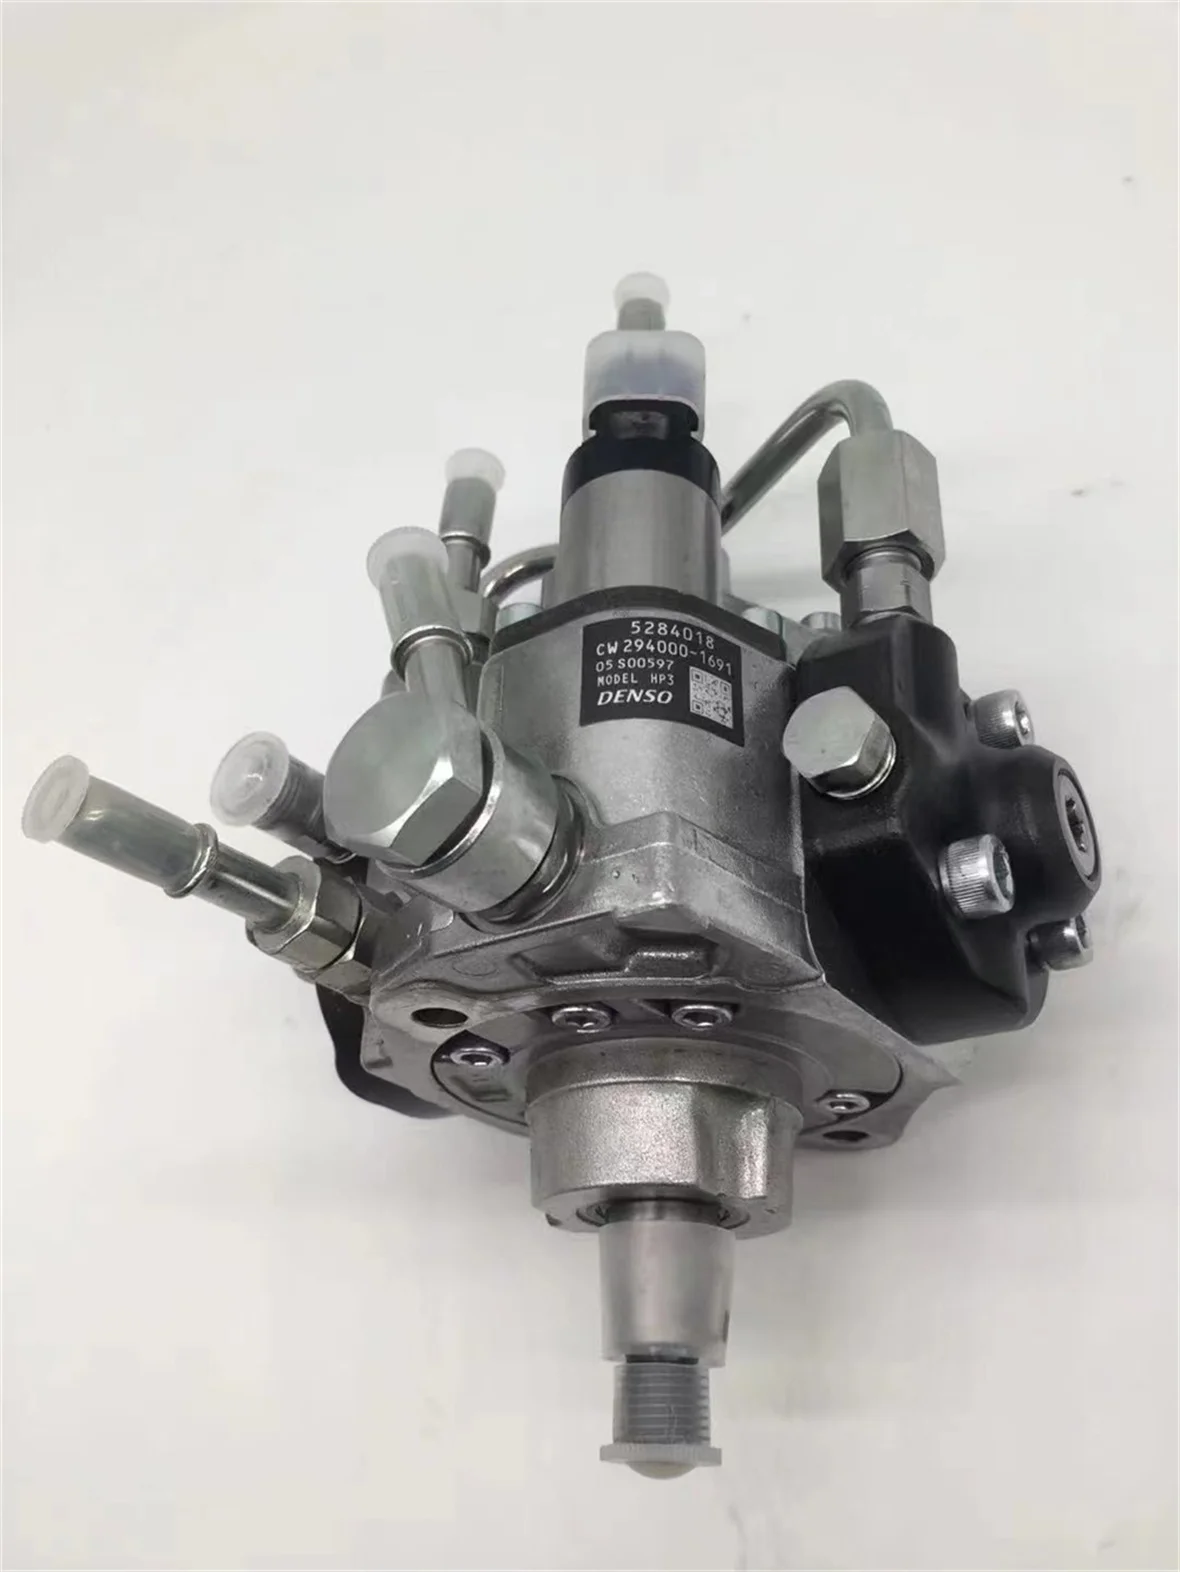 

Applicable to Cummins ISBE high-pressure diesel fuel pump 5284018 fuel pump/294000-1691 of Dongfeng Tianjin truck with electric